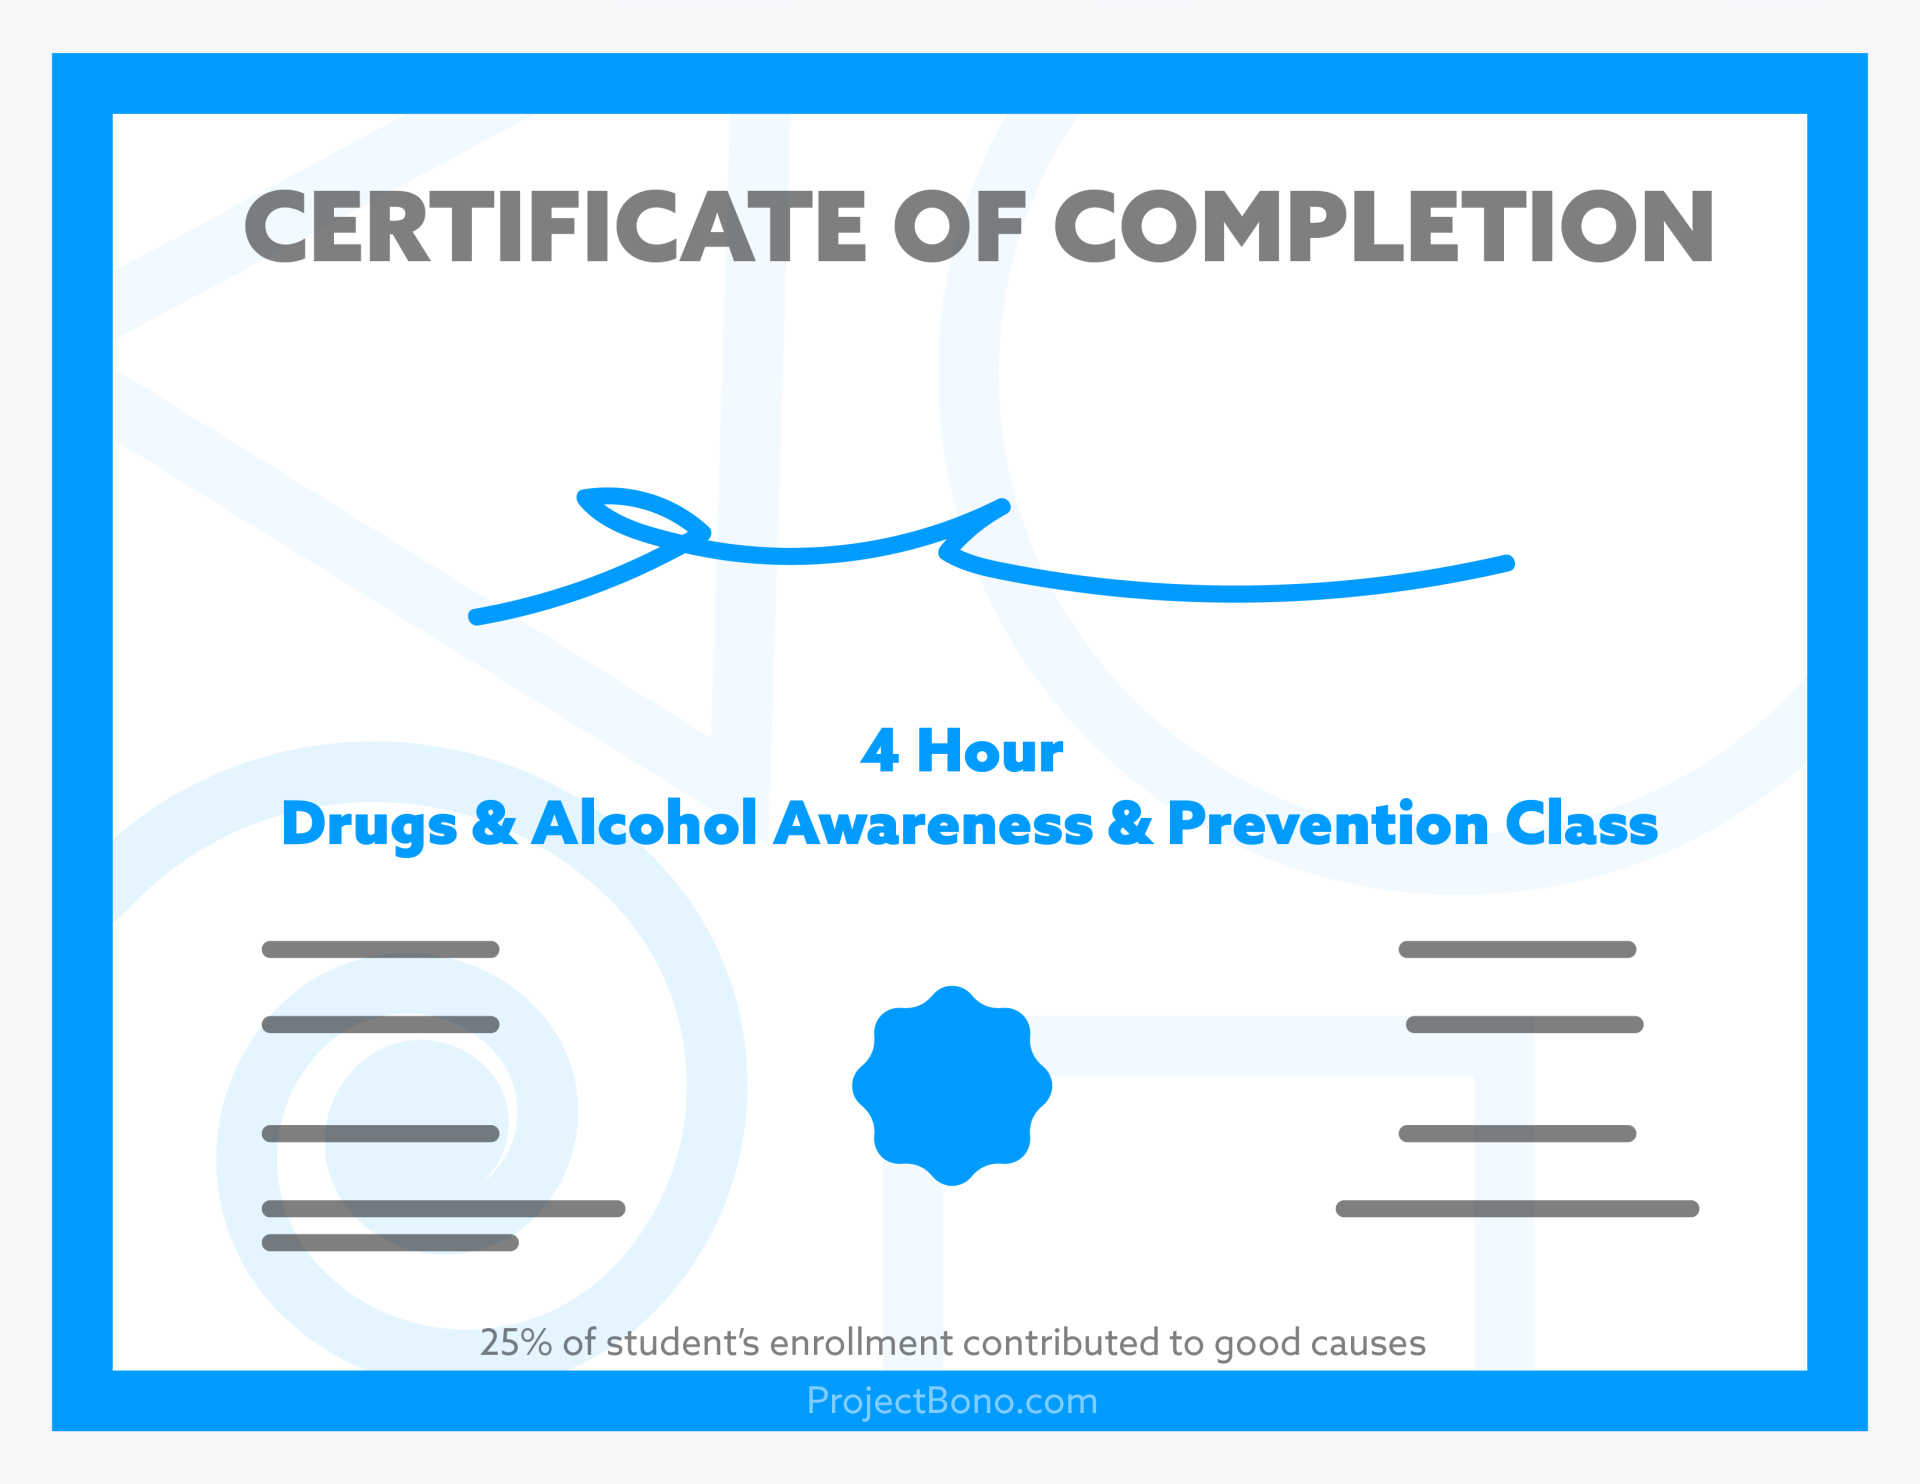 Alcohol Awareness Class Alcohol Awareness Course Alcohol Education Class Alcohol Education Program (AEP) CPS Drug Class DEJ Class Deferred Entry of Judgment Class Drug Awareness Class Drug Awareness Course Drug Education Class Drug Education Program Drug Offender Class Drug Offender Education Program (DOEP) Drug and Alcohol Awareness Class Drug and Alcohol Awareness Course Substance Abuse Class Project Bono Court Ordered Course for Drugs and Alcohol Online Approved